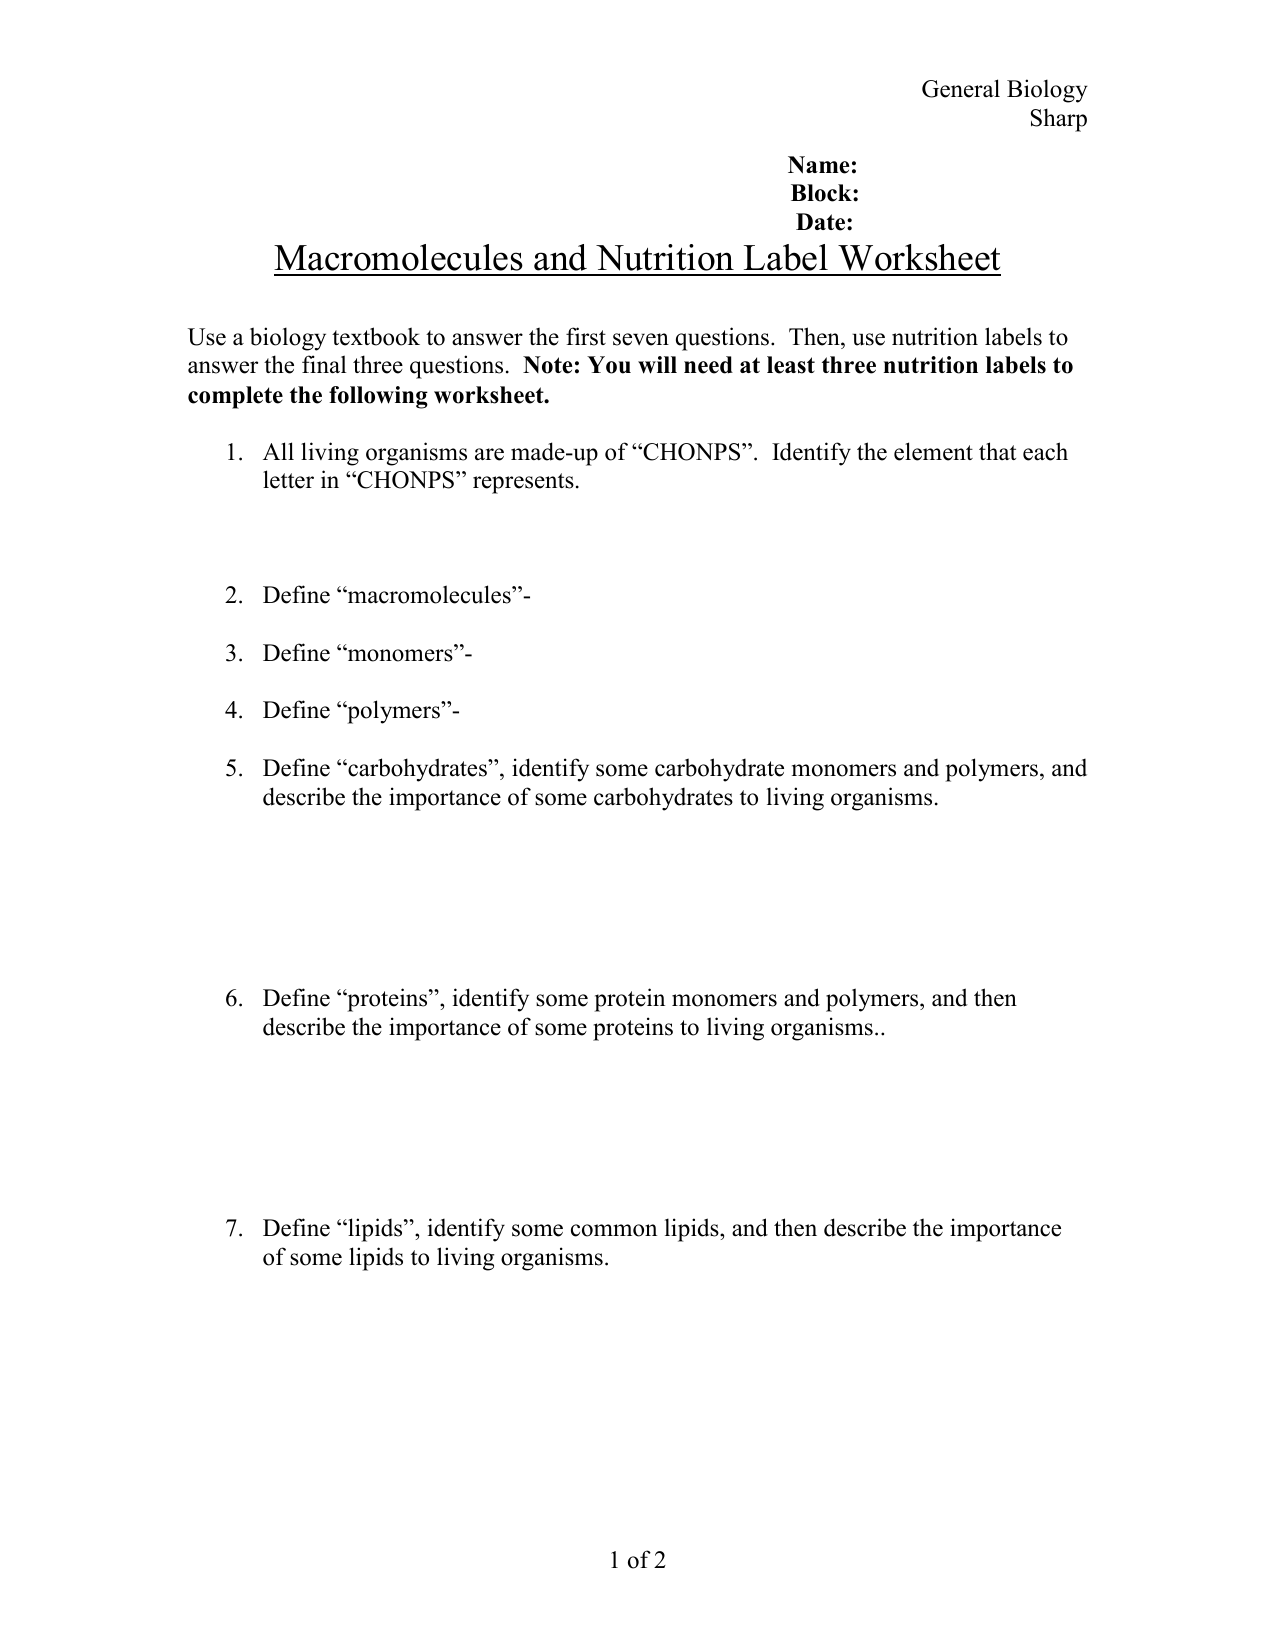 macromolecules-and-nutrition-label-chemistry Inside Nutrition Label Worksheet Answers